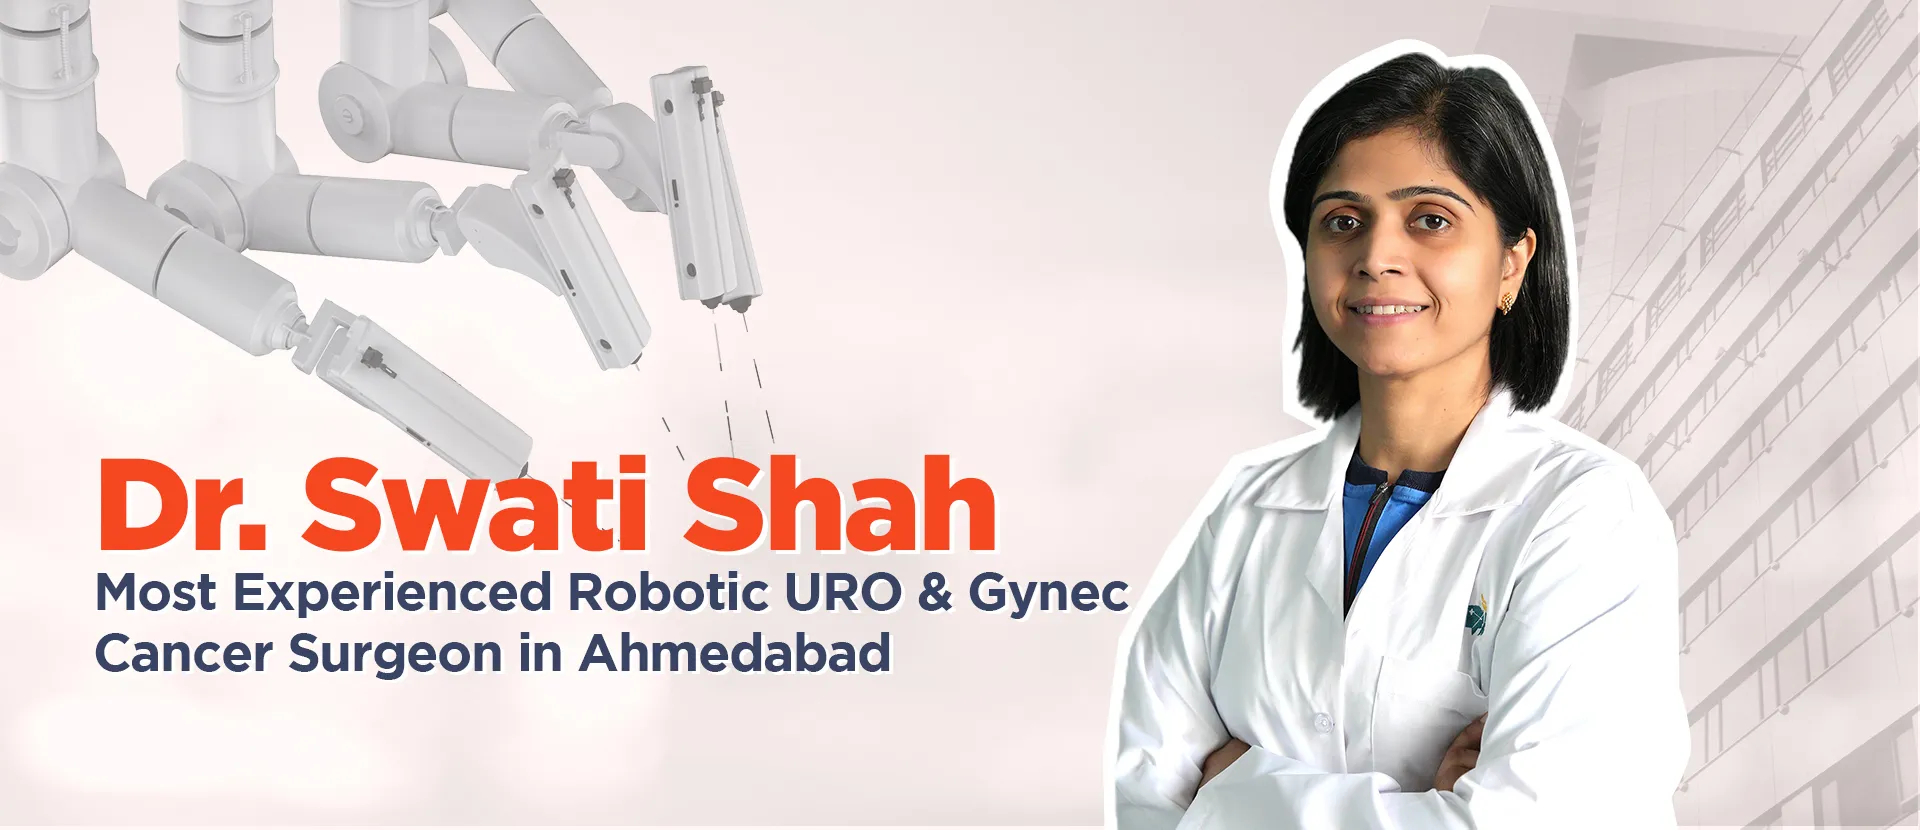 Most expereicned Best robotic URO & Gynec cancer surgeon in Ahmedabad